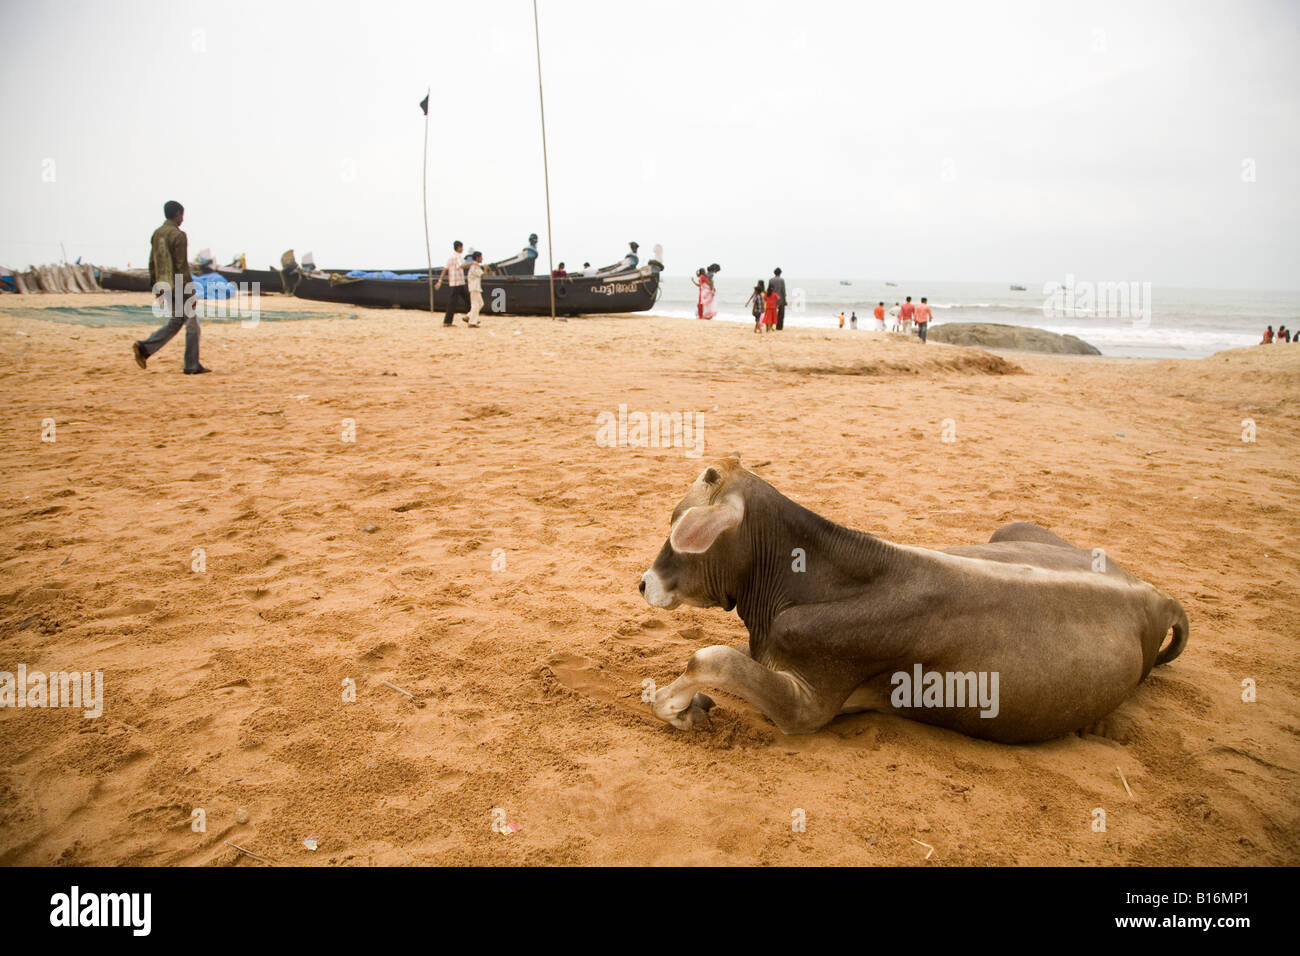 Kappil Beach in Kasaragod, Kerala. Fishing boats are pulled up on the beach. A cow relaxes in the foreground. Stock Photo